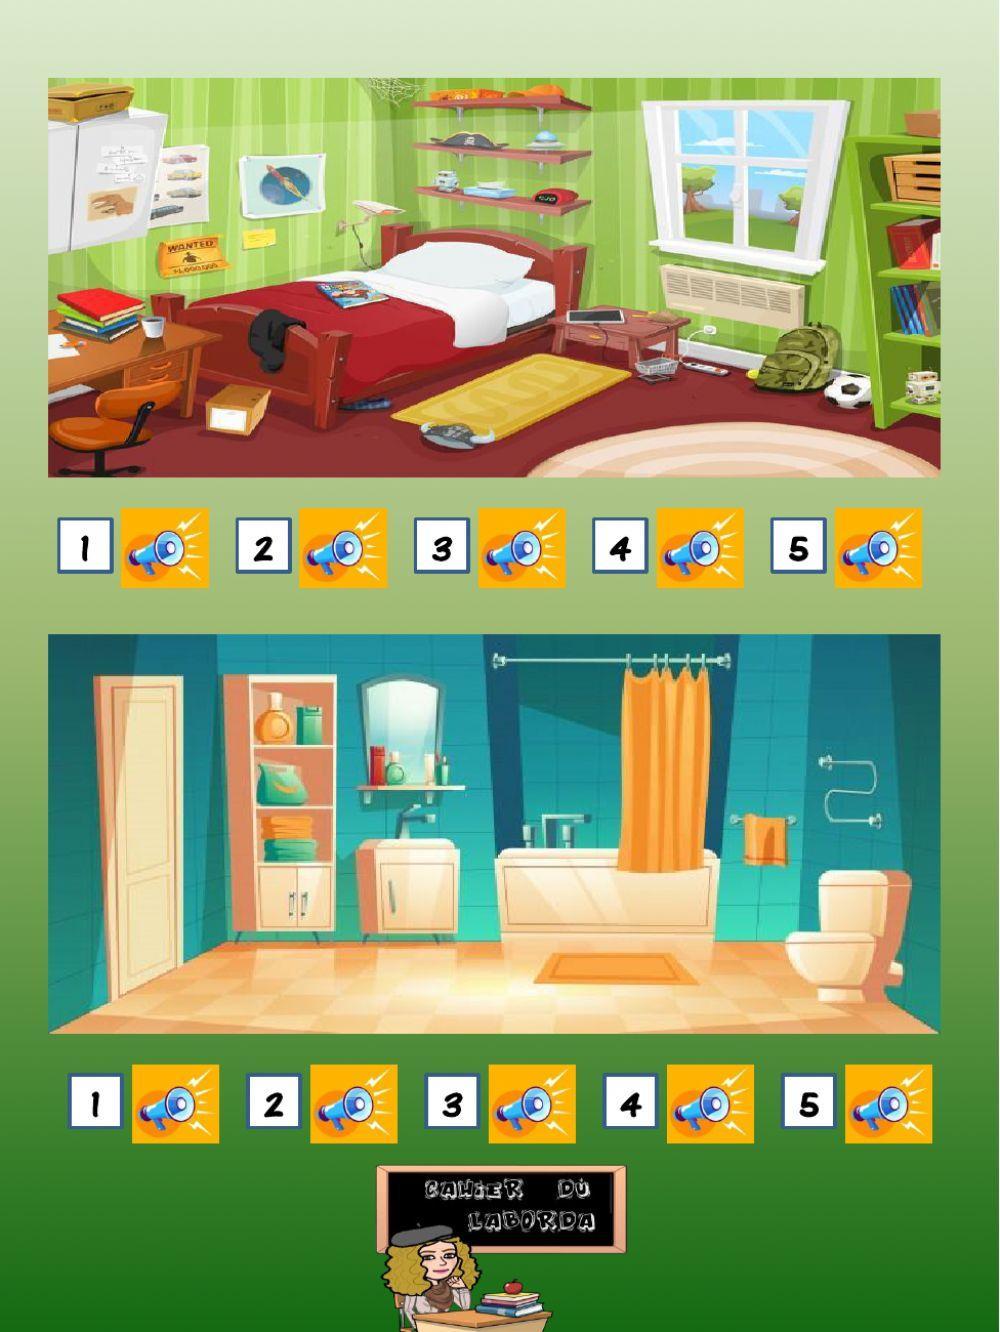 Furnitures and prepositions (Listening)